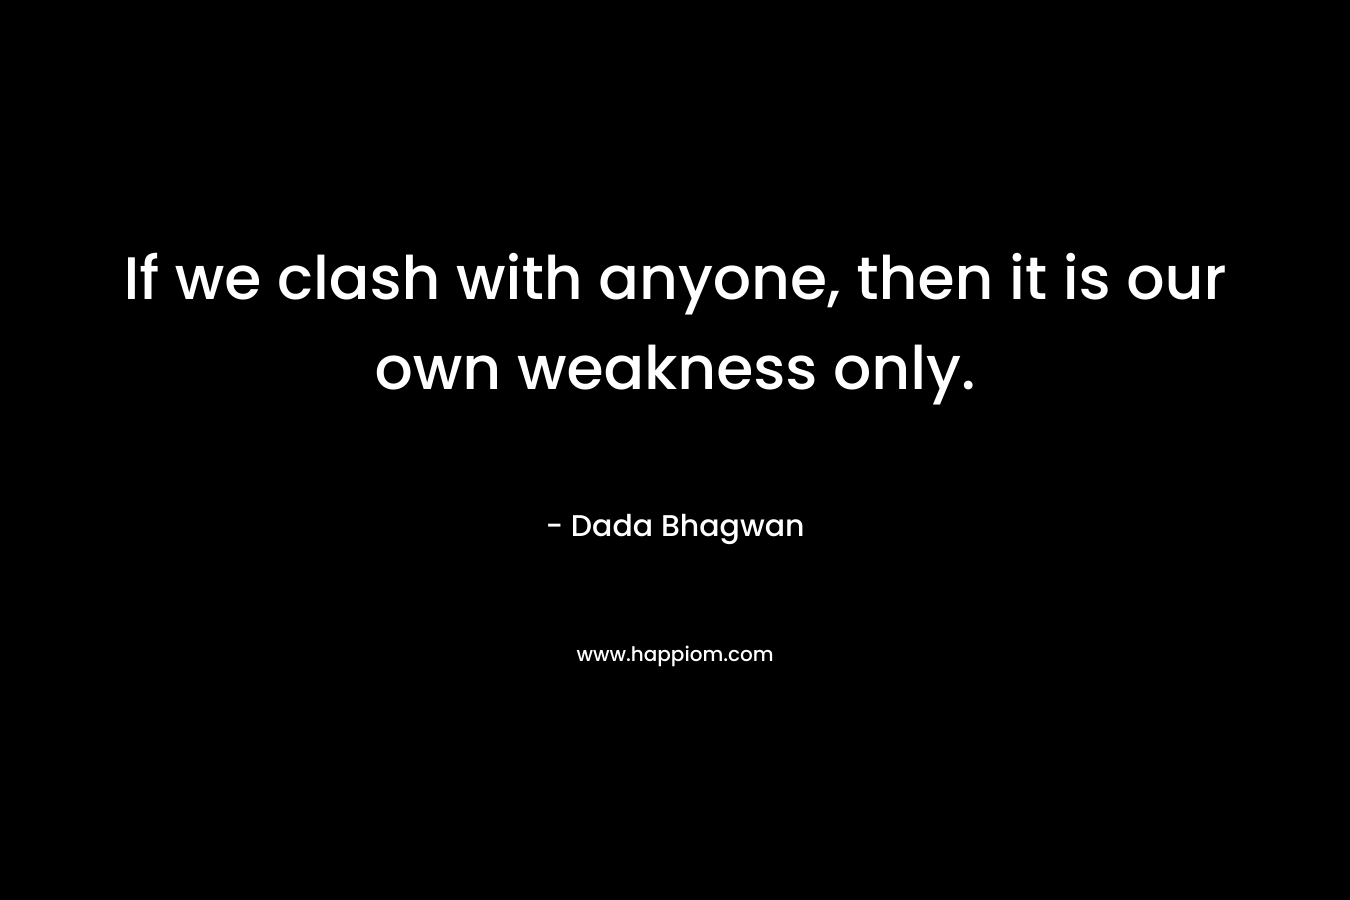 If we clash with anyone, then it is our own weakness only.